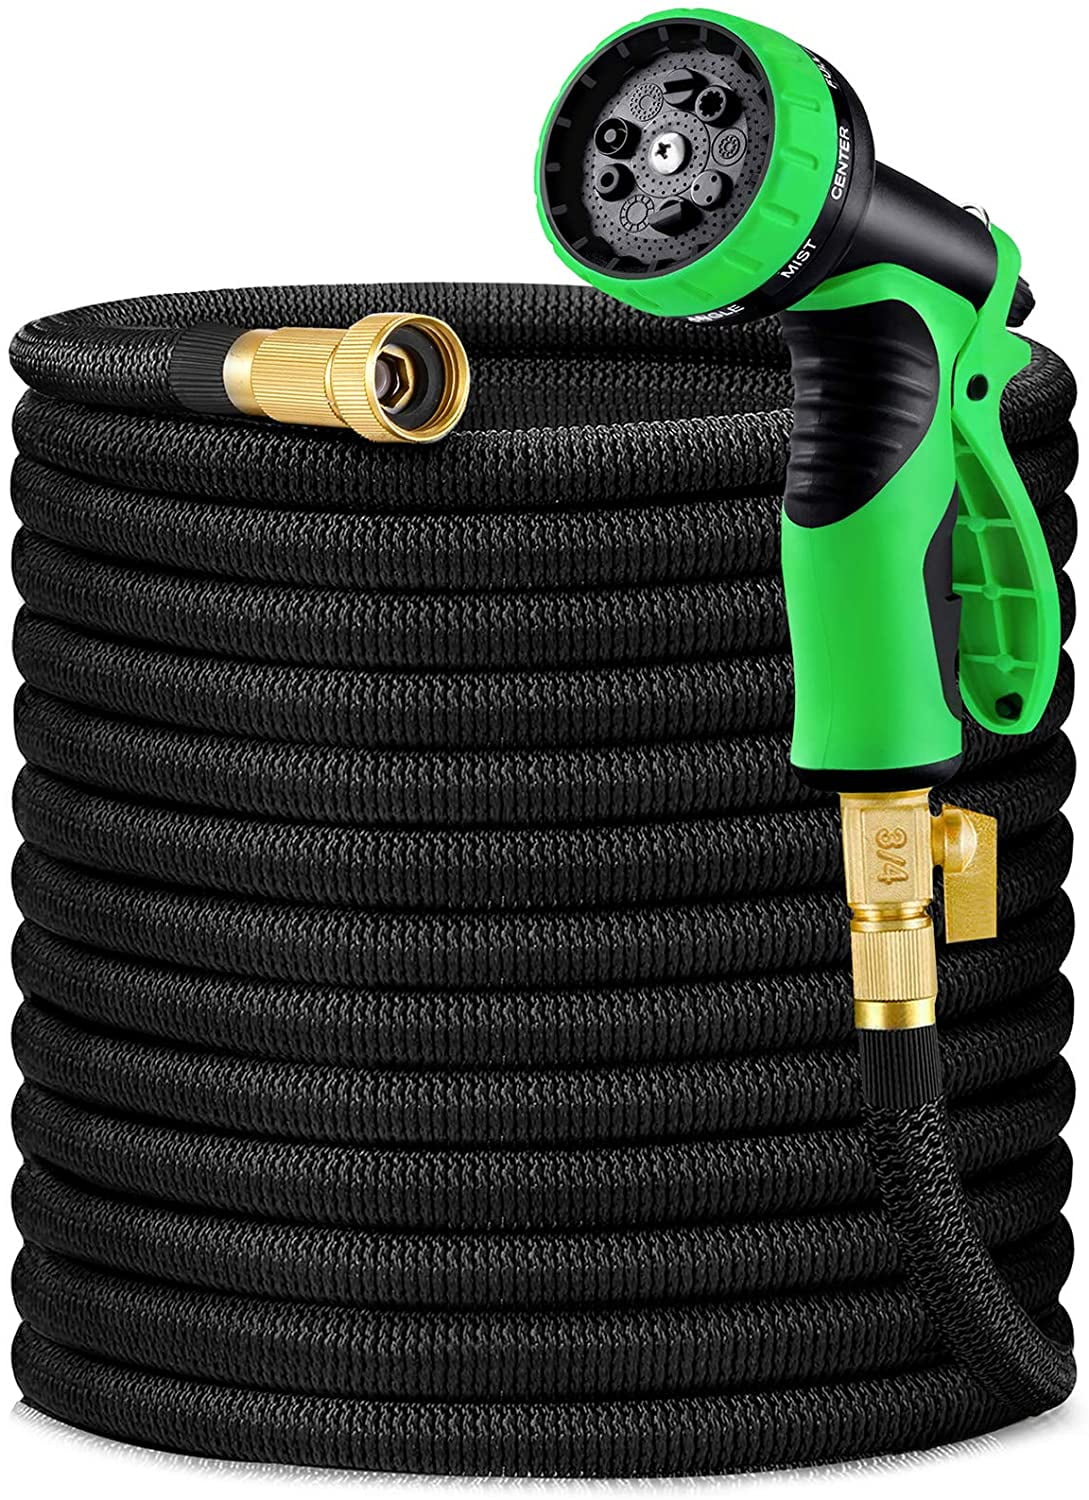 Ymiko 8 Patterns Garden Hose Sprayer Nozzle for Watering Washing Cleaning